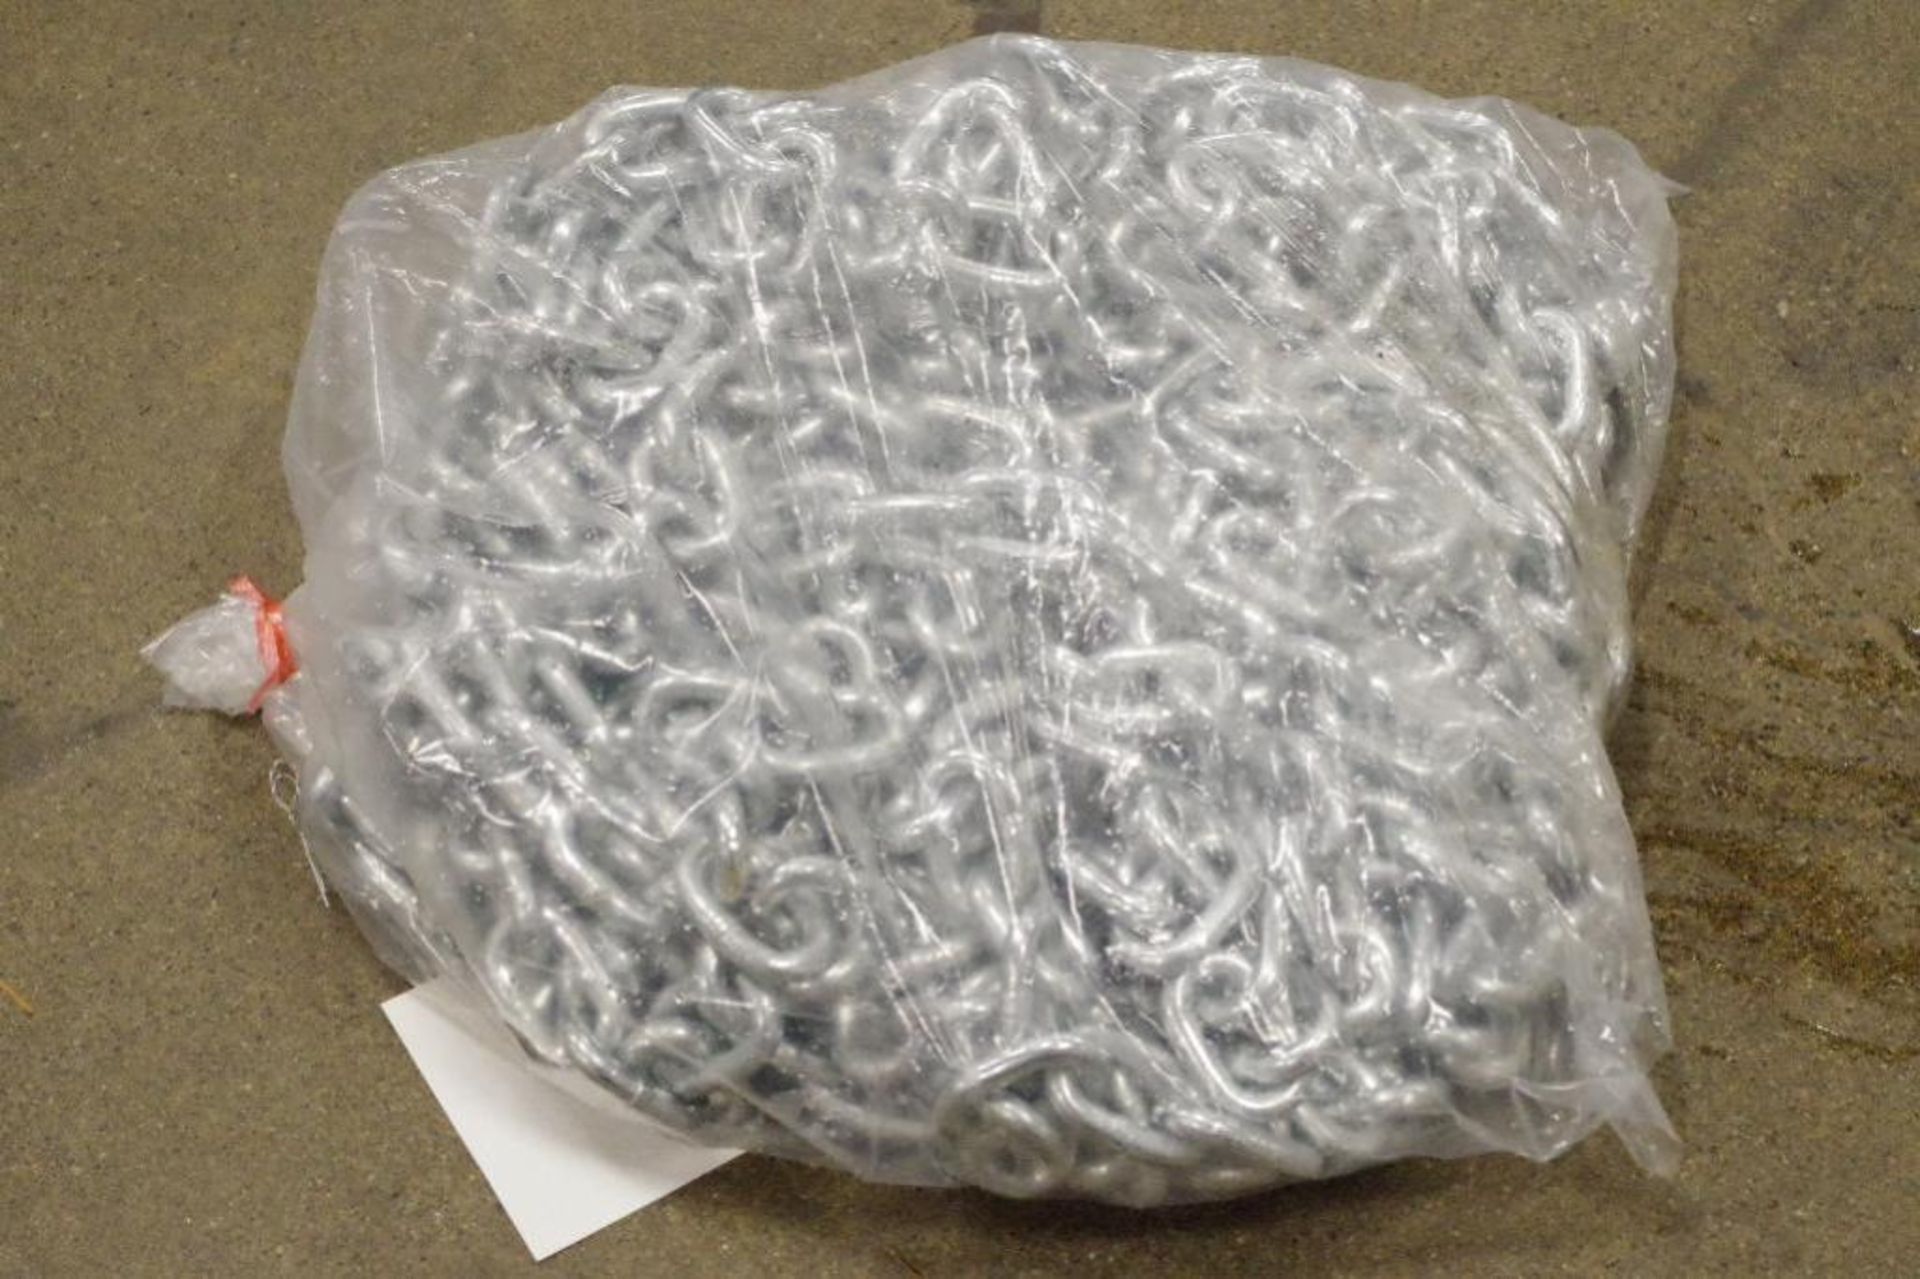 NEW DAYTON 3/8" x 60' Proof Coil Chain